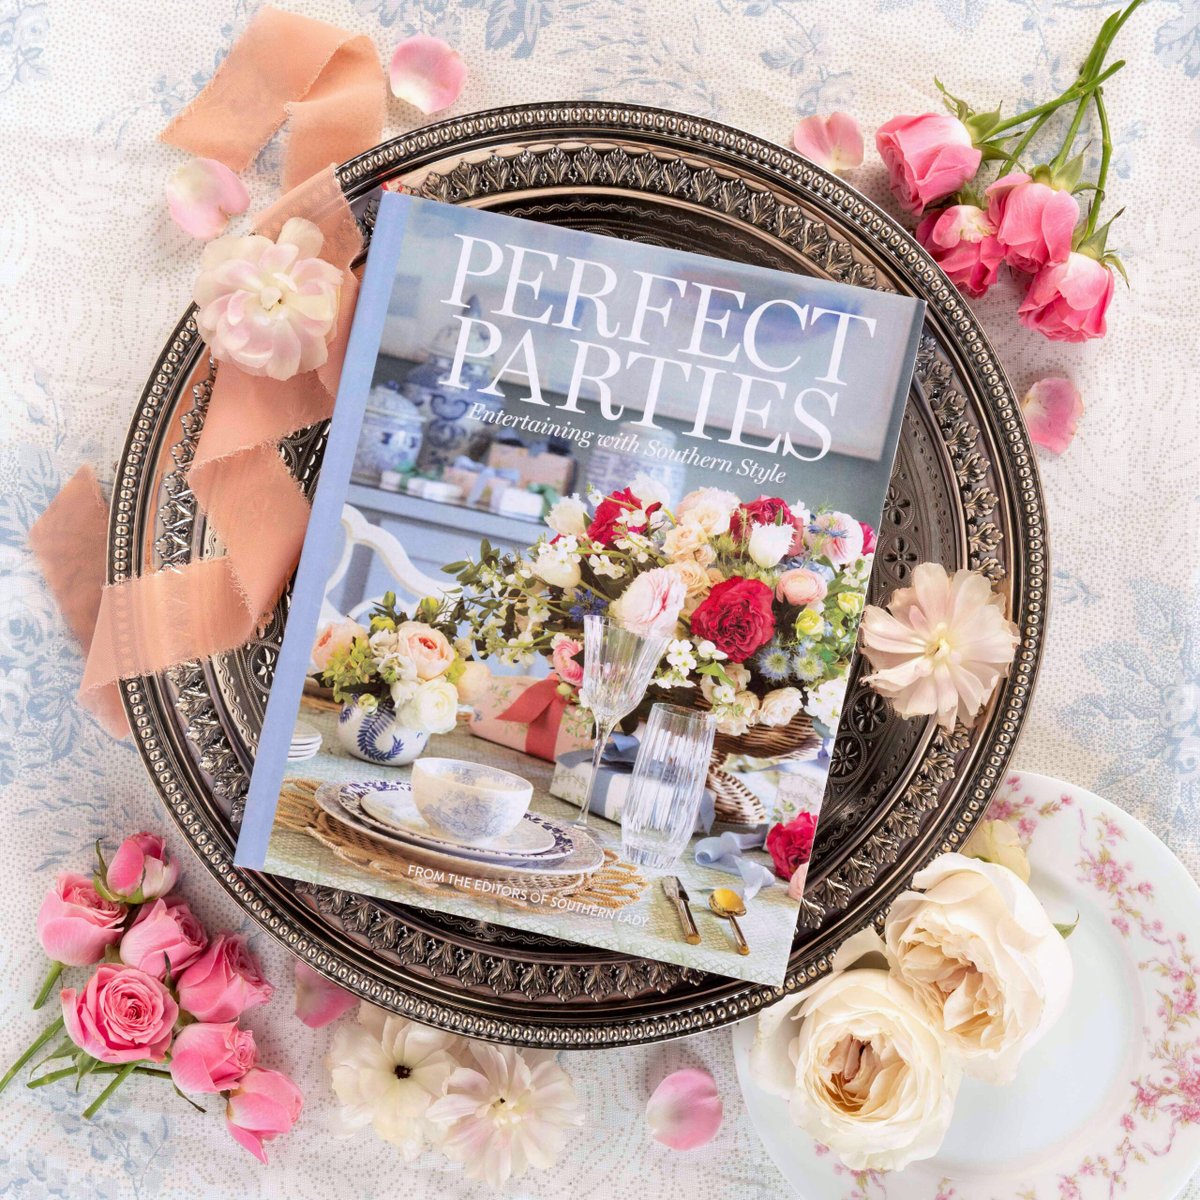 Perfect Parties is available for preorder! The editors of Southern Lady invite you to enjoy our newest collection of entertaining ideas for any occasion. Preorder your copy at southernladymagazine.com/product/perfec….

#southernladymag #partyideas #entertaininginspo #grandmillennial #babyshowers